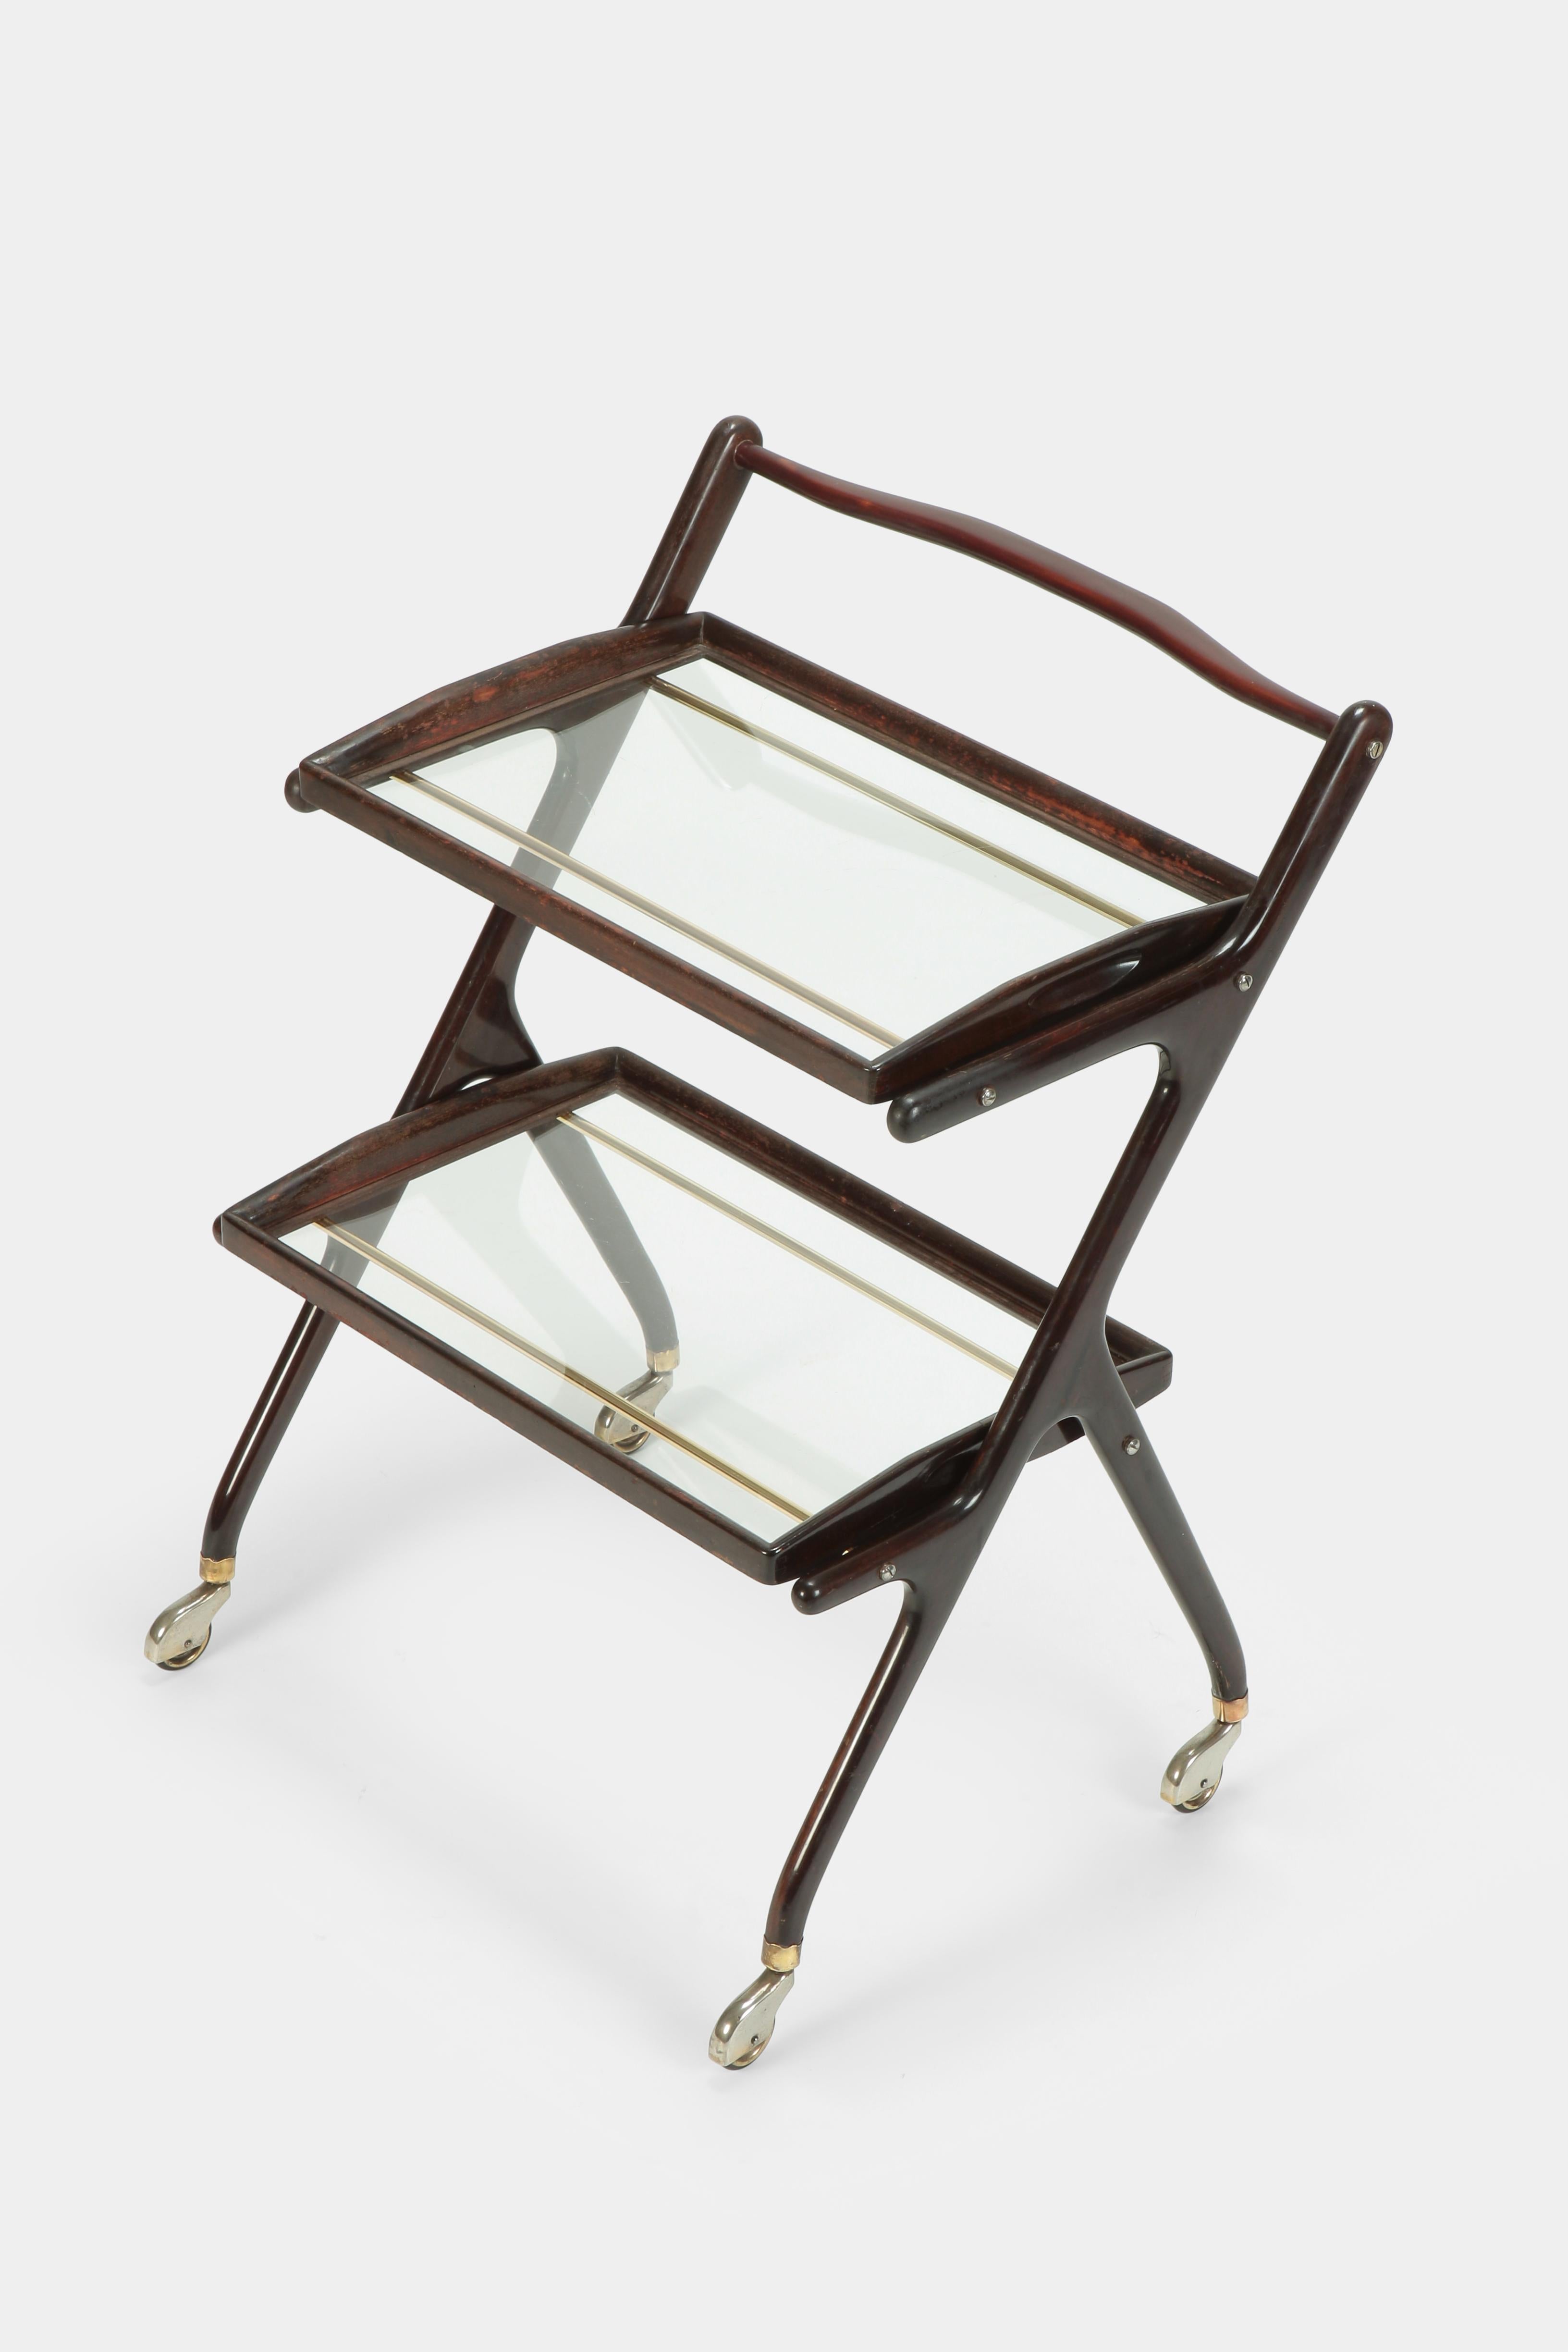 Cesare Lacca bar cart manufactured in the 1950s in Italy. The frame is made of solid mahogany wood. Two dismountable serving trays with glass surrounded by mahogany placed on two brass braces.